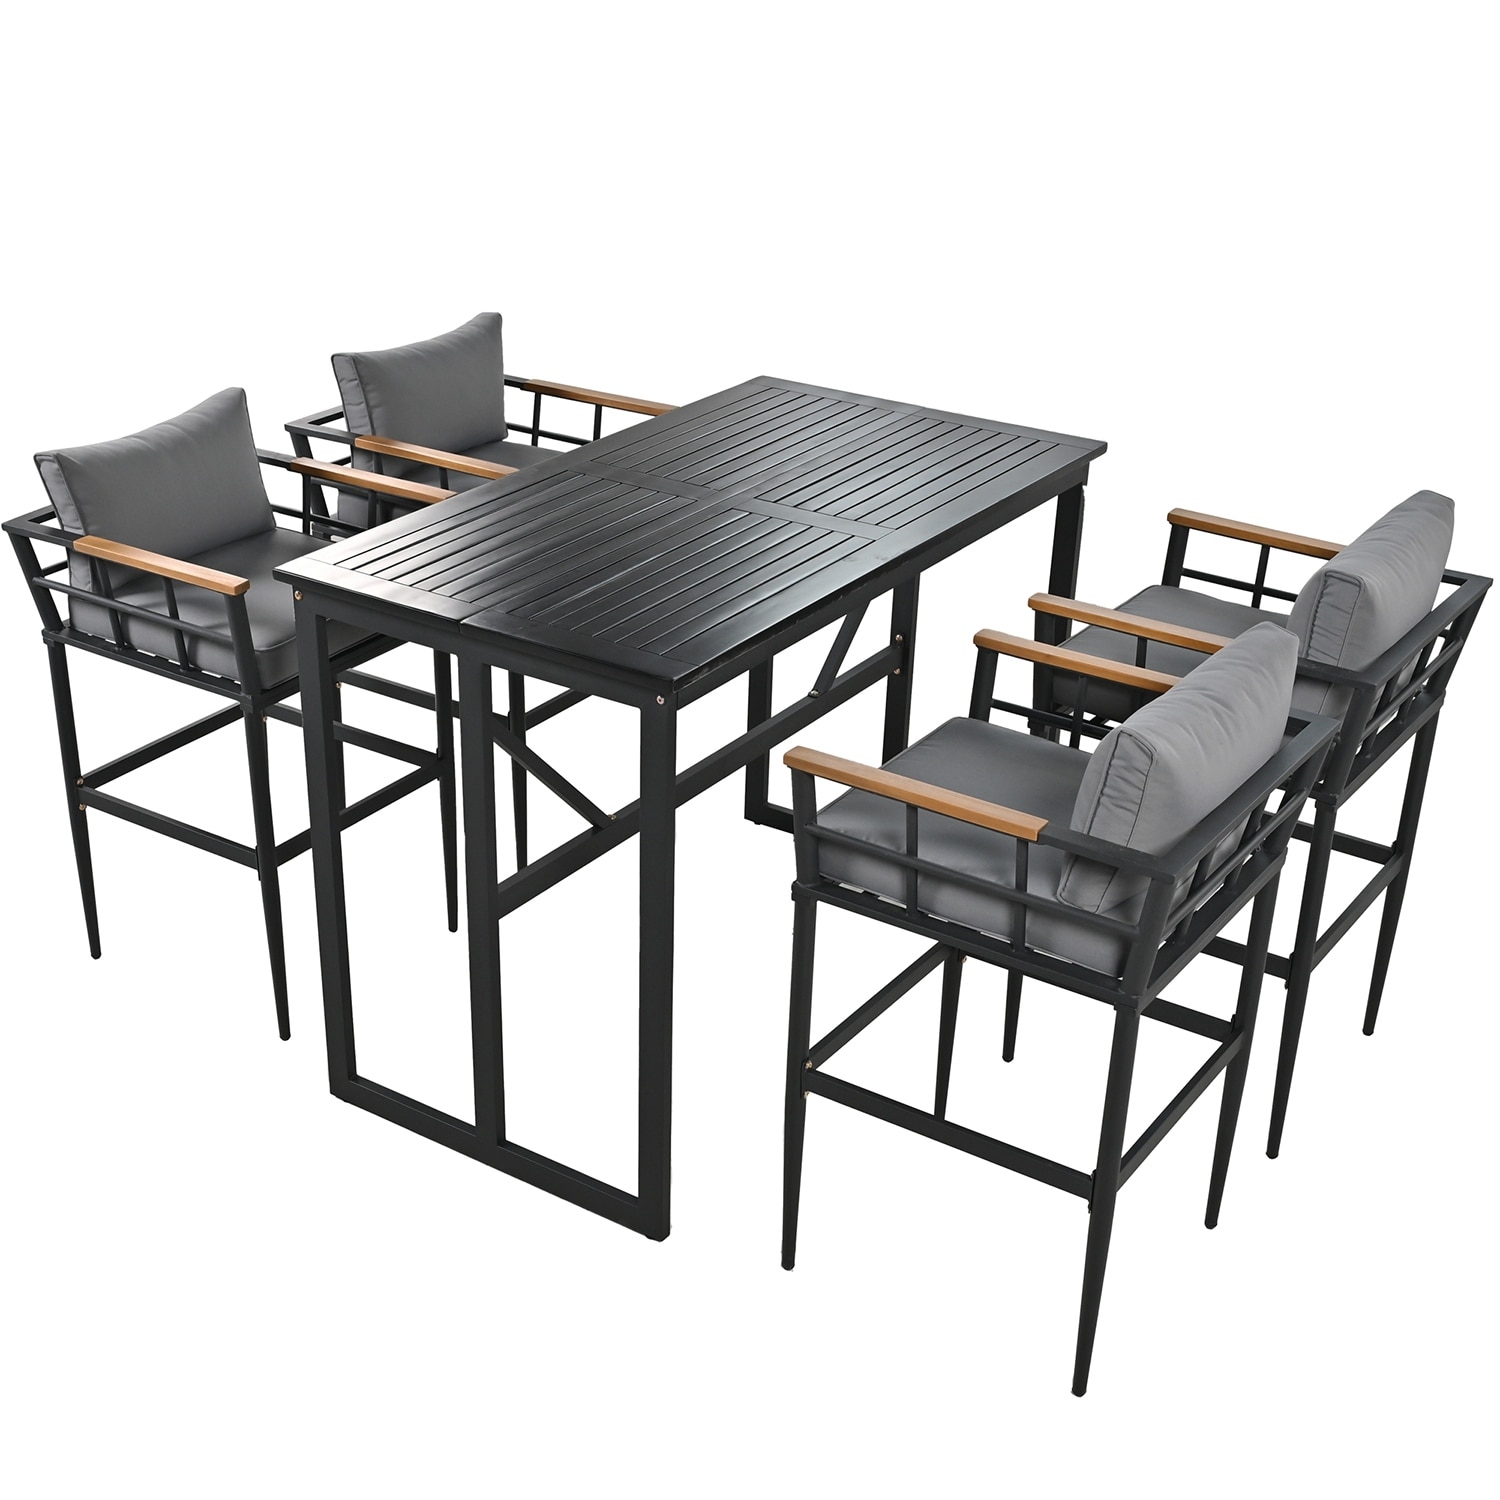 5pieces Steel Outdoor Dining Table Set With 1 Table And 4 Chairs